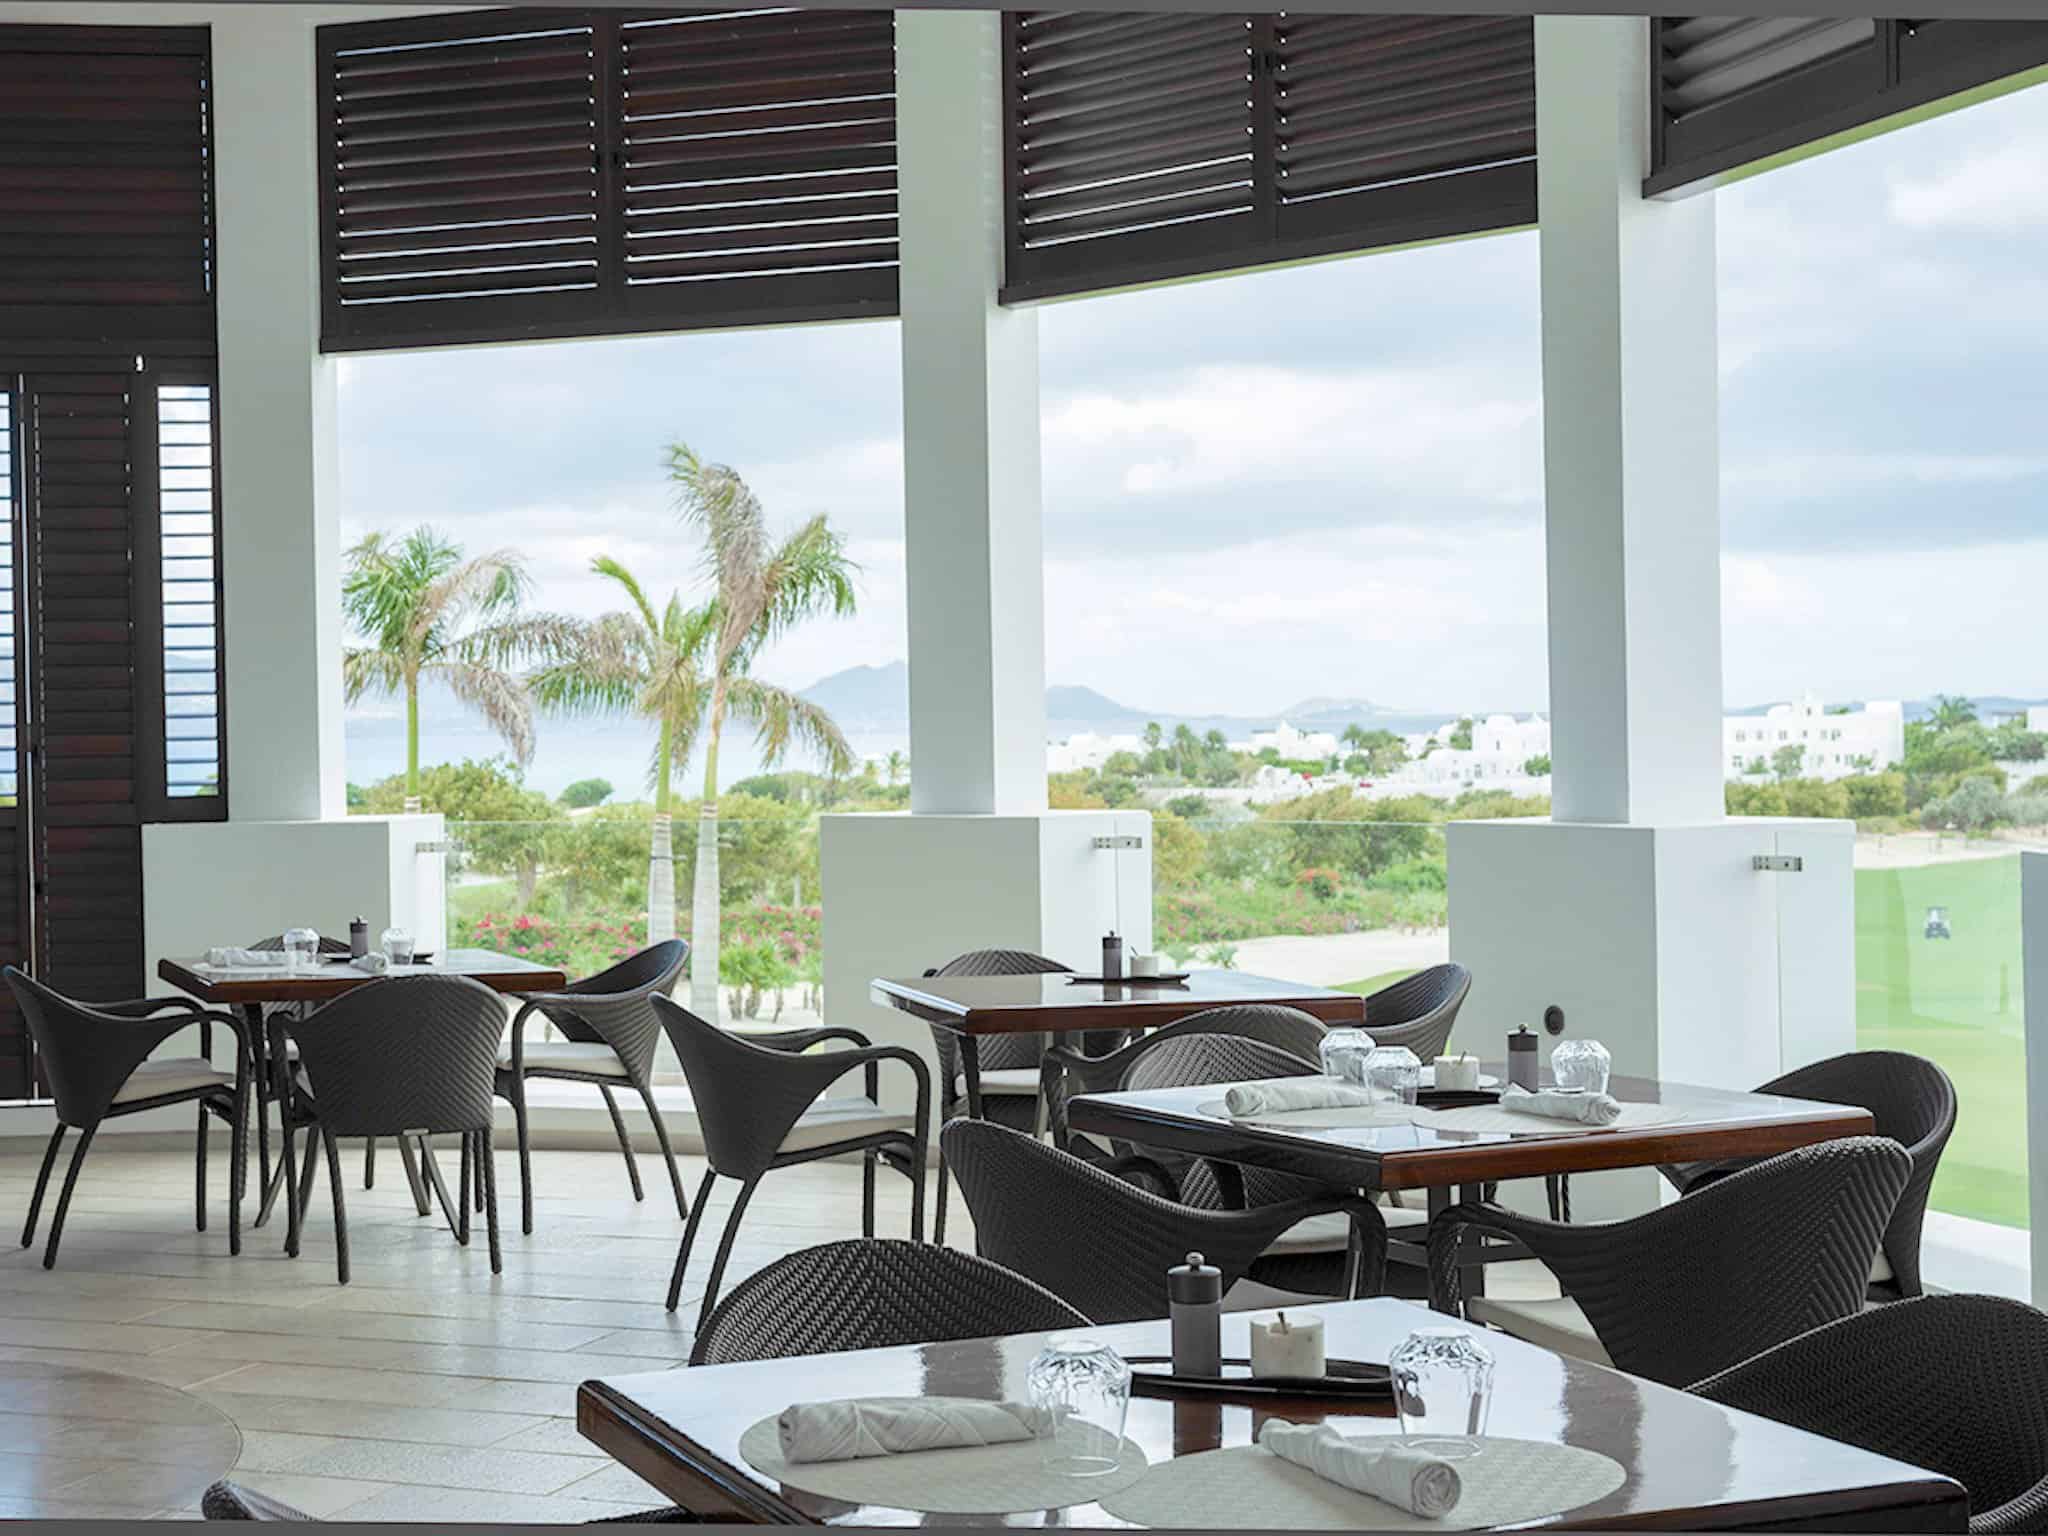 Panoramic views in the dining room at D. Richards restaurant in Anguilla.  